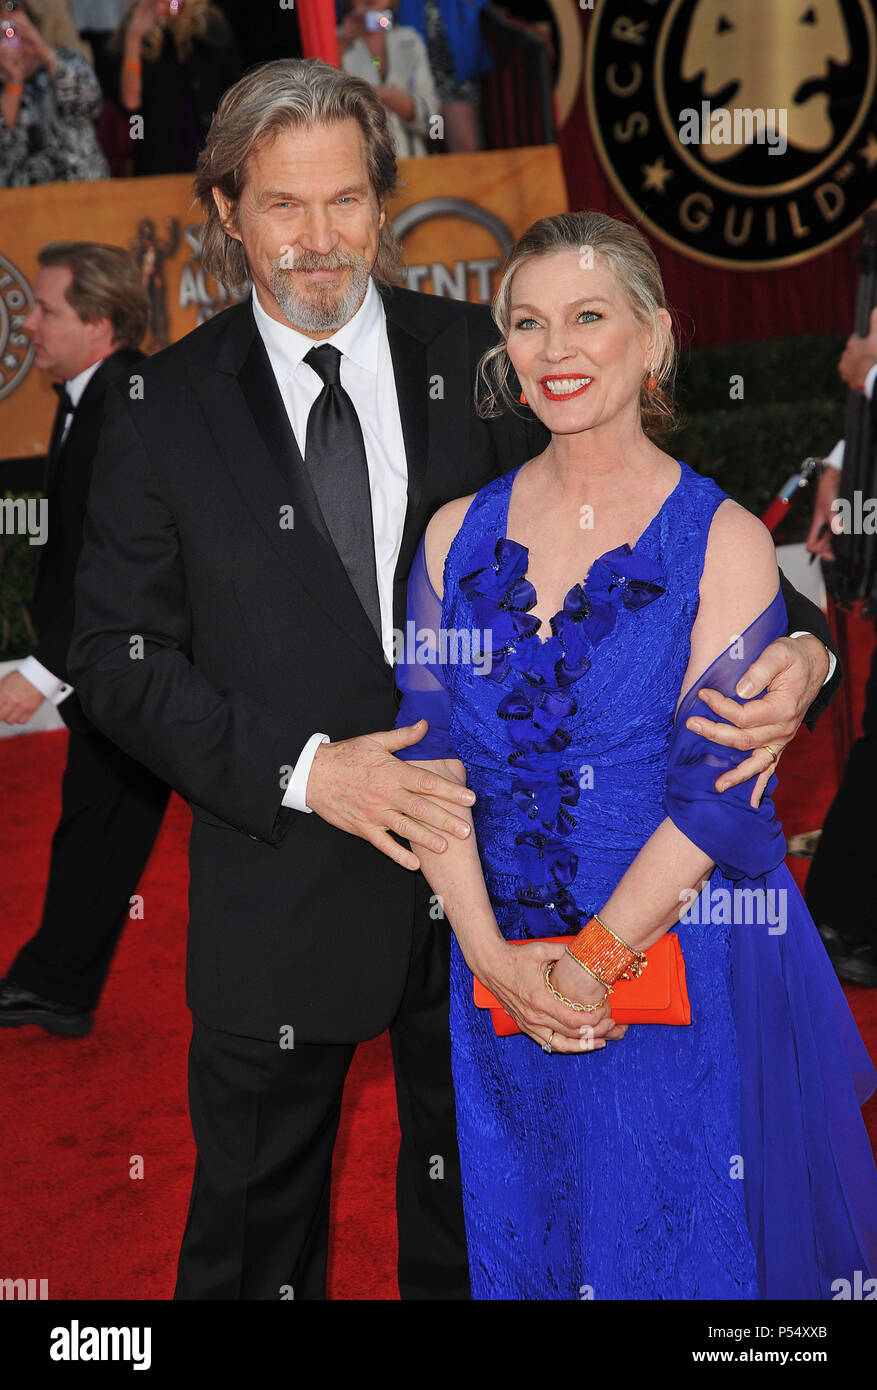 Jeff Bridges Susan Geston  191   - 16 th Annual Screen Actors Guild Awards at the Shrine Auditorium in Los Angeles.Jeff Bridges Susan Geston  191  Event in Hollywood Life - California, Red Carpet Event, USA, Film Industry, Celebrities, Photography, Bestof, Arts Culture and Entertainment, Celebrities fashion, Best of, Hollywood Life, Event in Hollywood Life - California, Red Carpet and backstage, Music celebrities, Topix, Couple, family ( husband and wife ) and kids- Children, brothers and sisters inquiry tsuni@Gamma-USA.com, Credit Tsuni / USA, 2010 Stock Photo